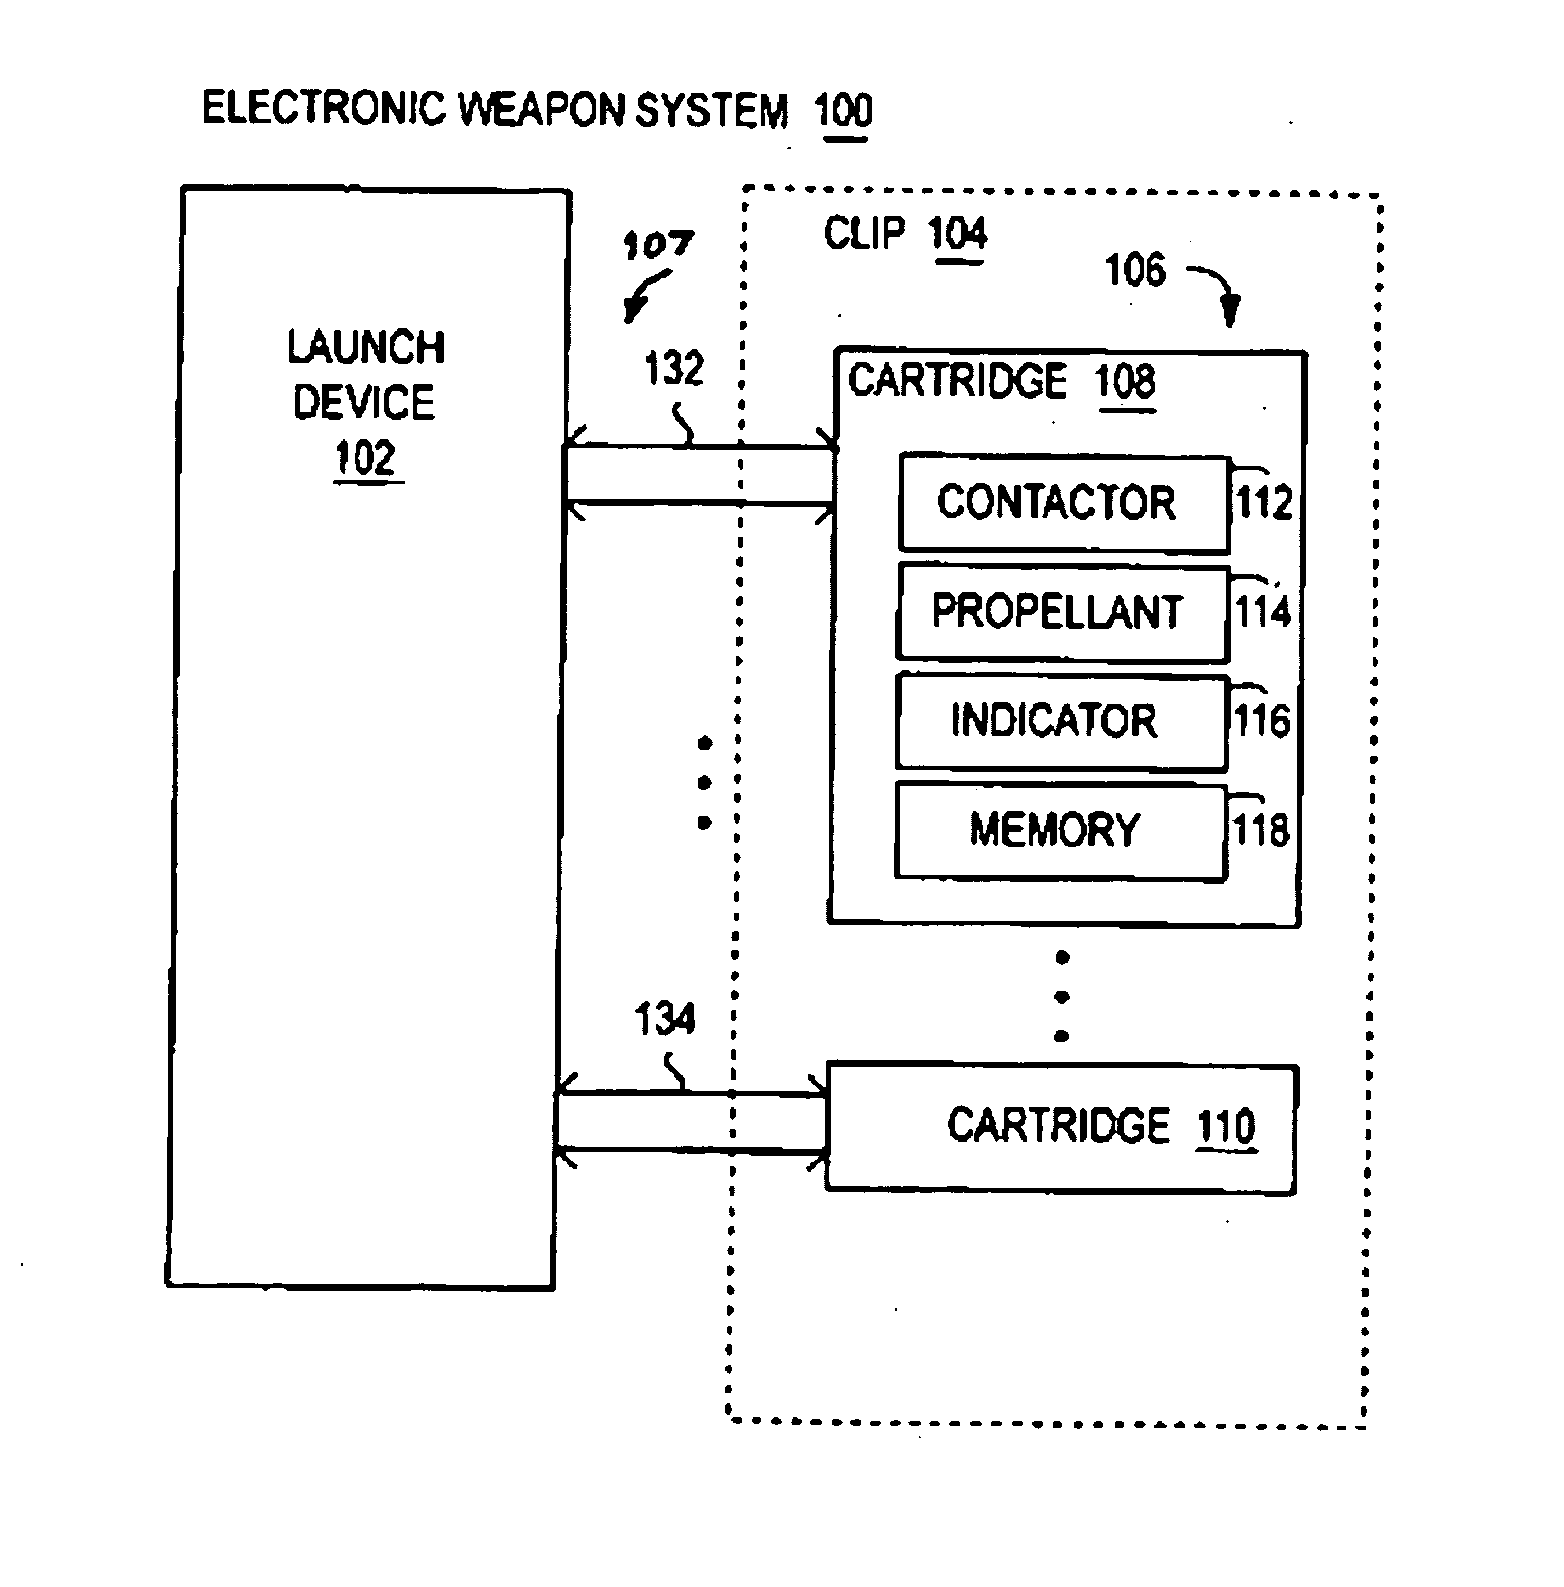 Systems and methods for describing a deployment unit for an electronic